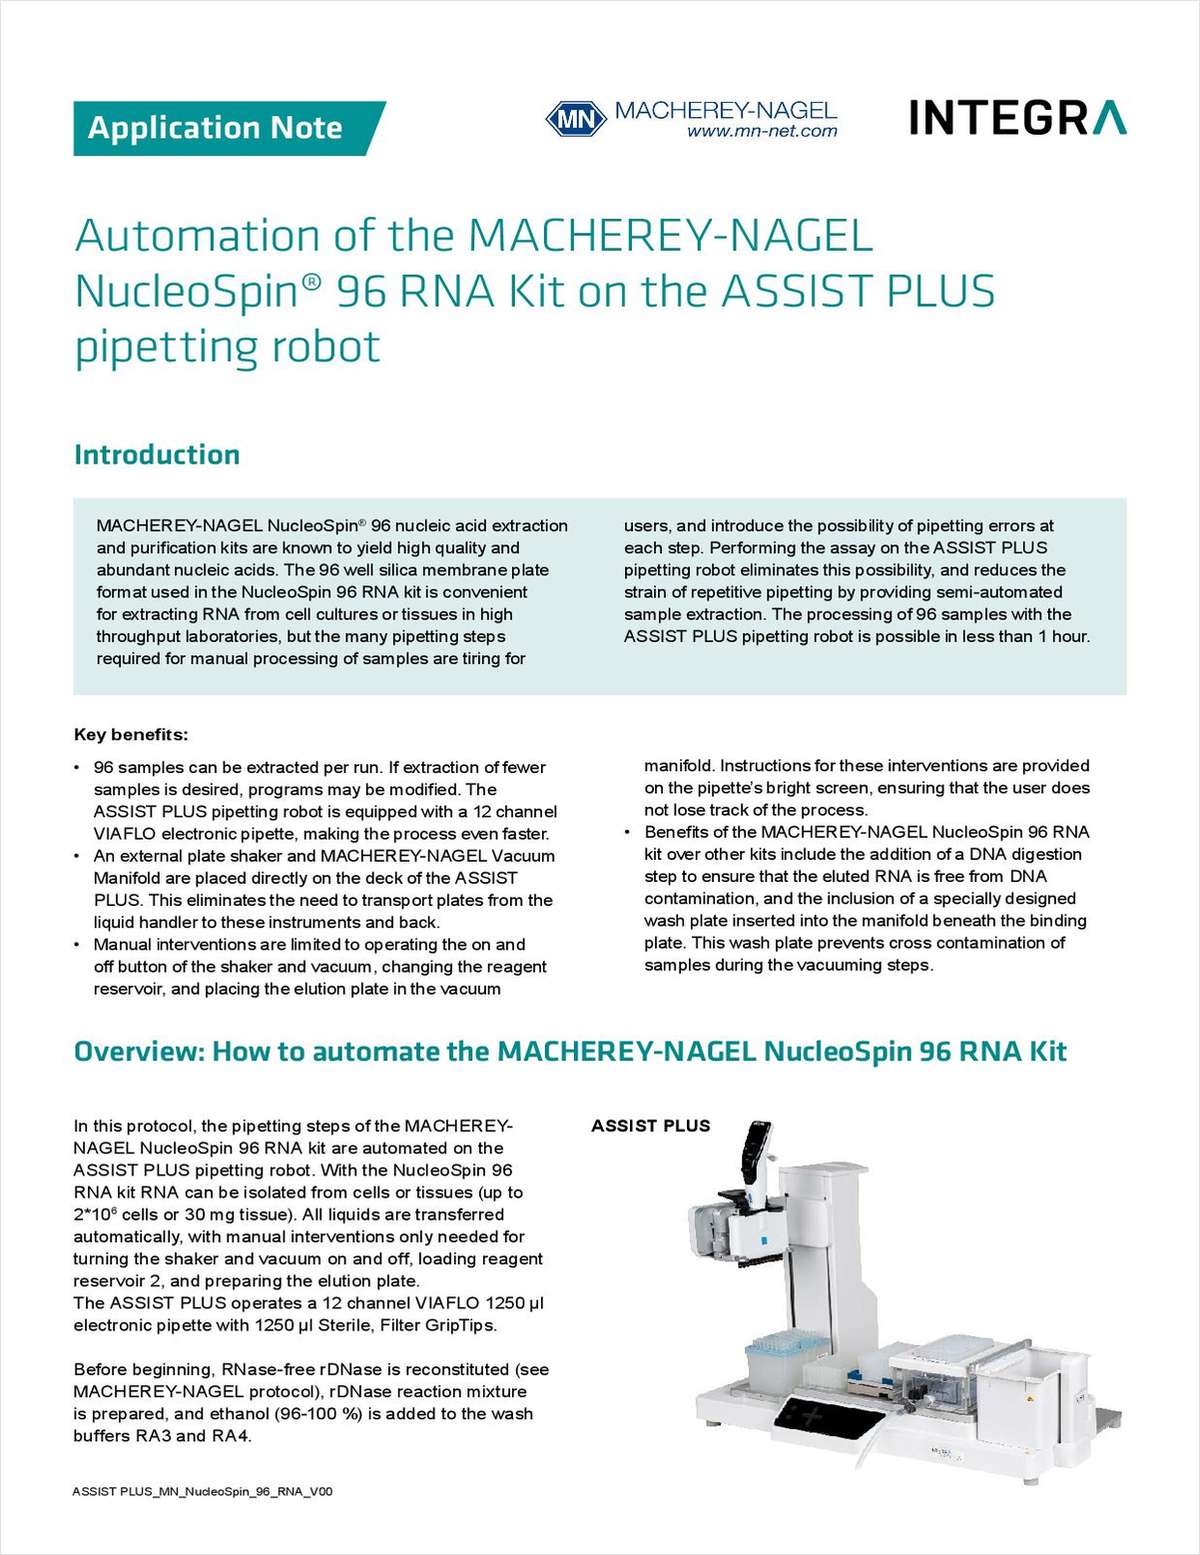 Automation of the Macherey-Nagel NucleoSpin 96 RNA Kit on the Assist Plus Pipetting Robot